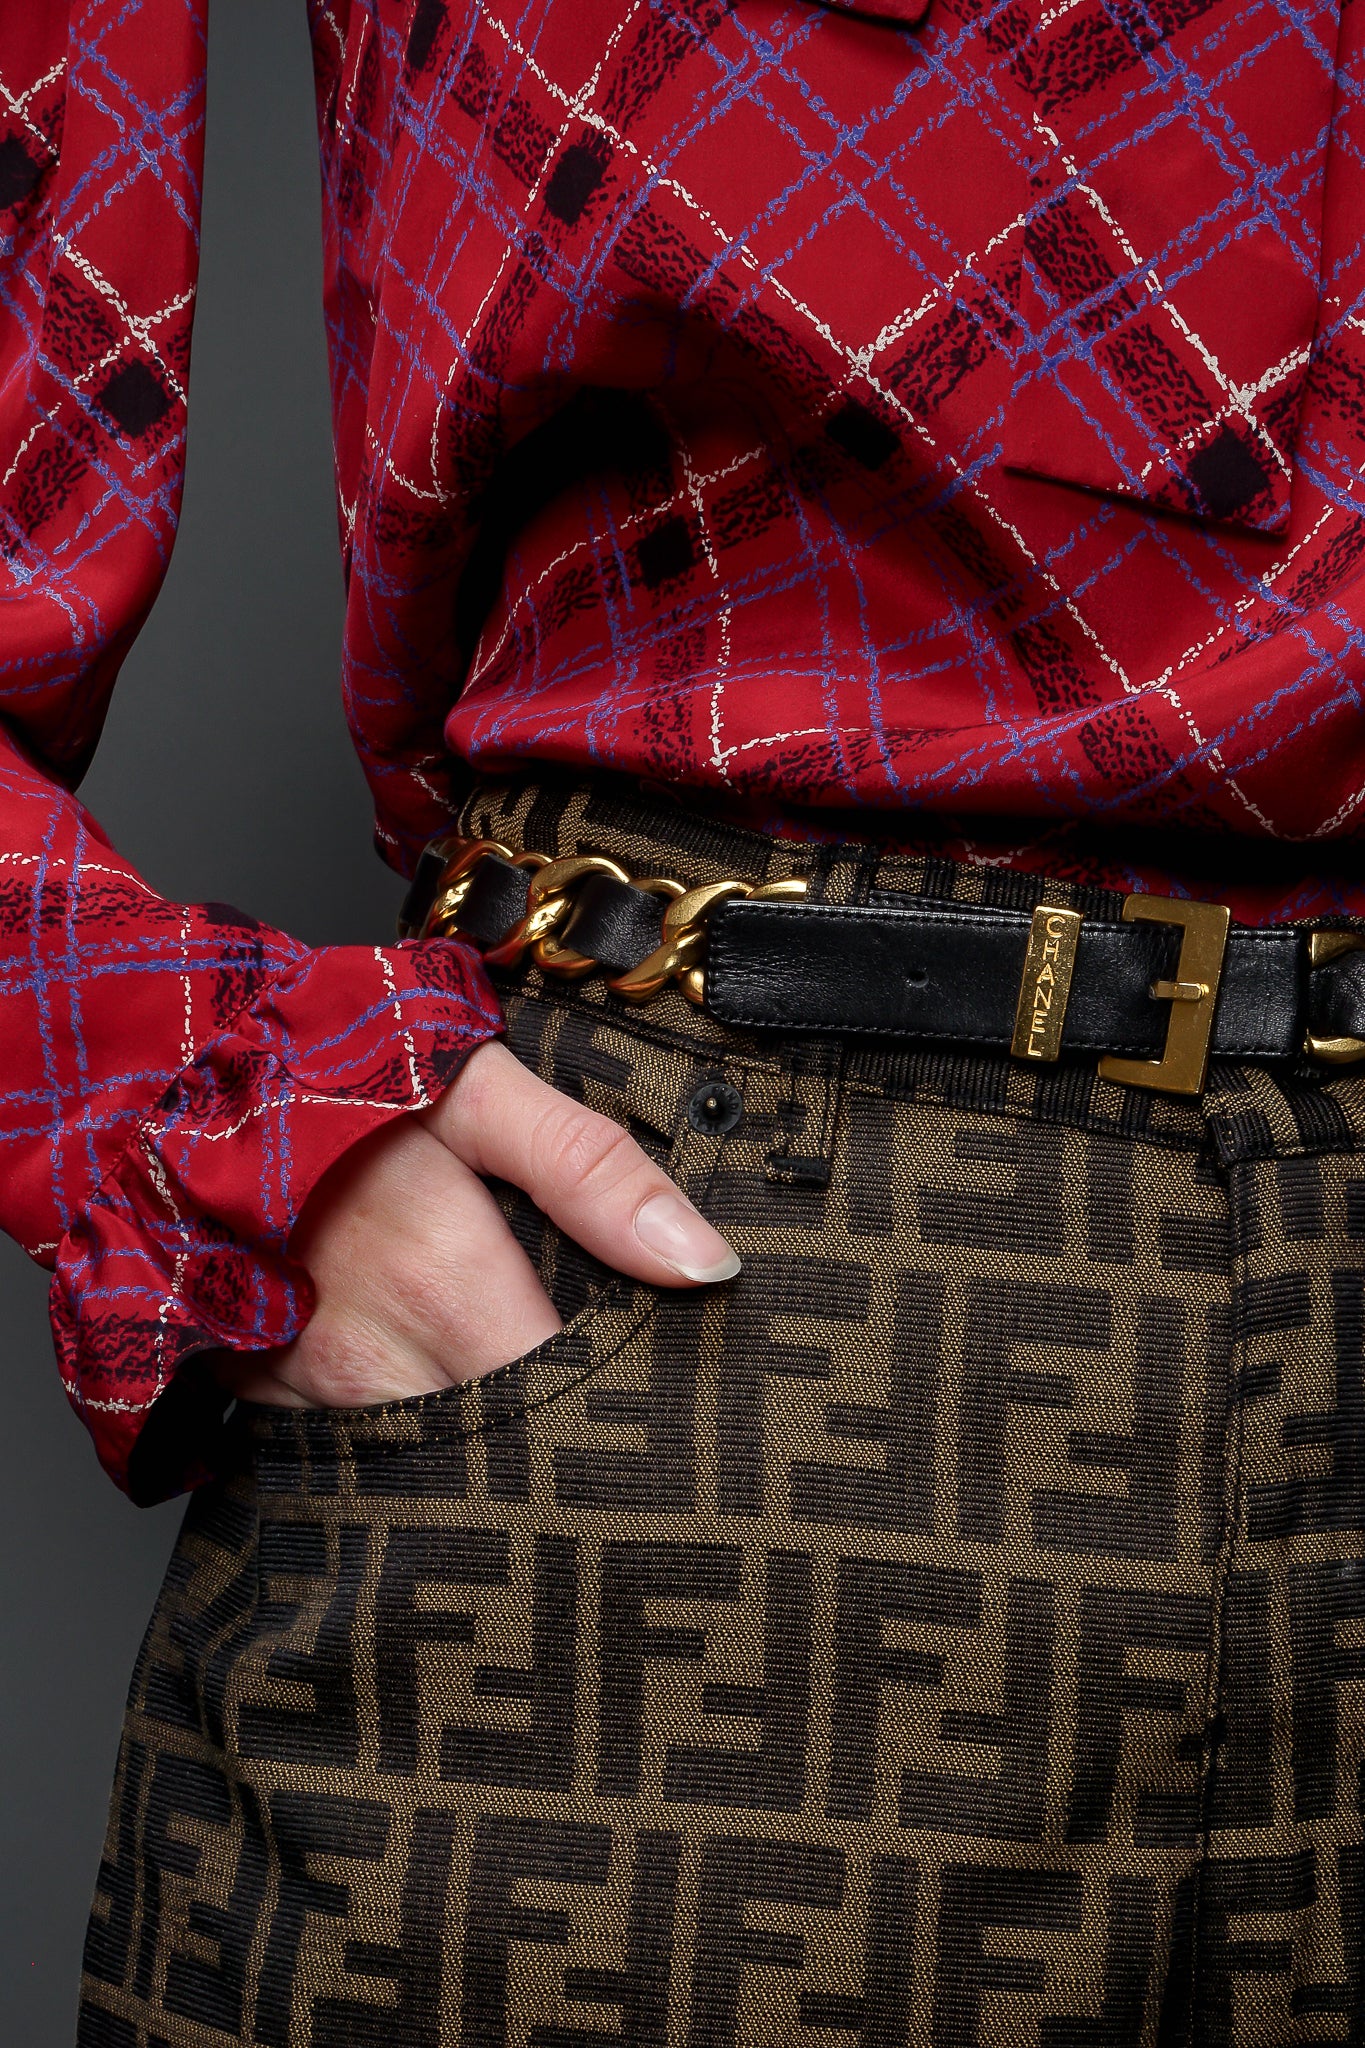 Vintage Chanel Iconic Woven Leather Chain Belt on Fendi pants at Recess Los Angeles